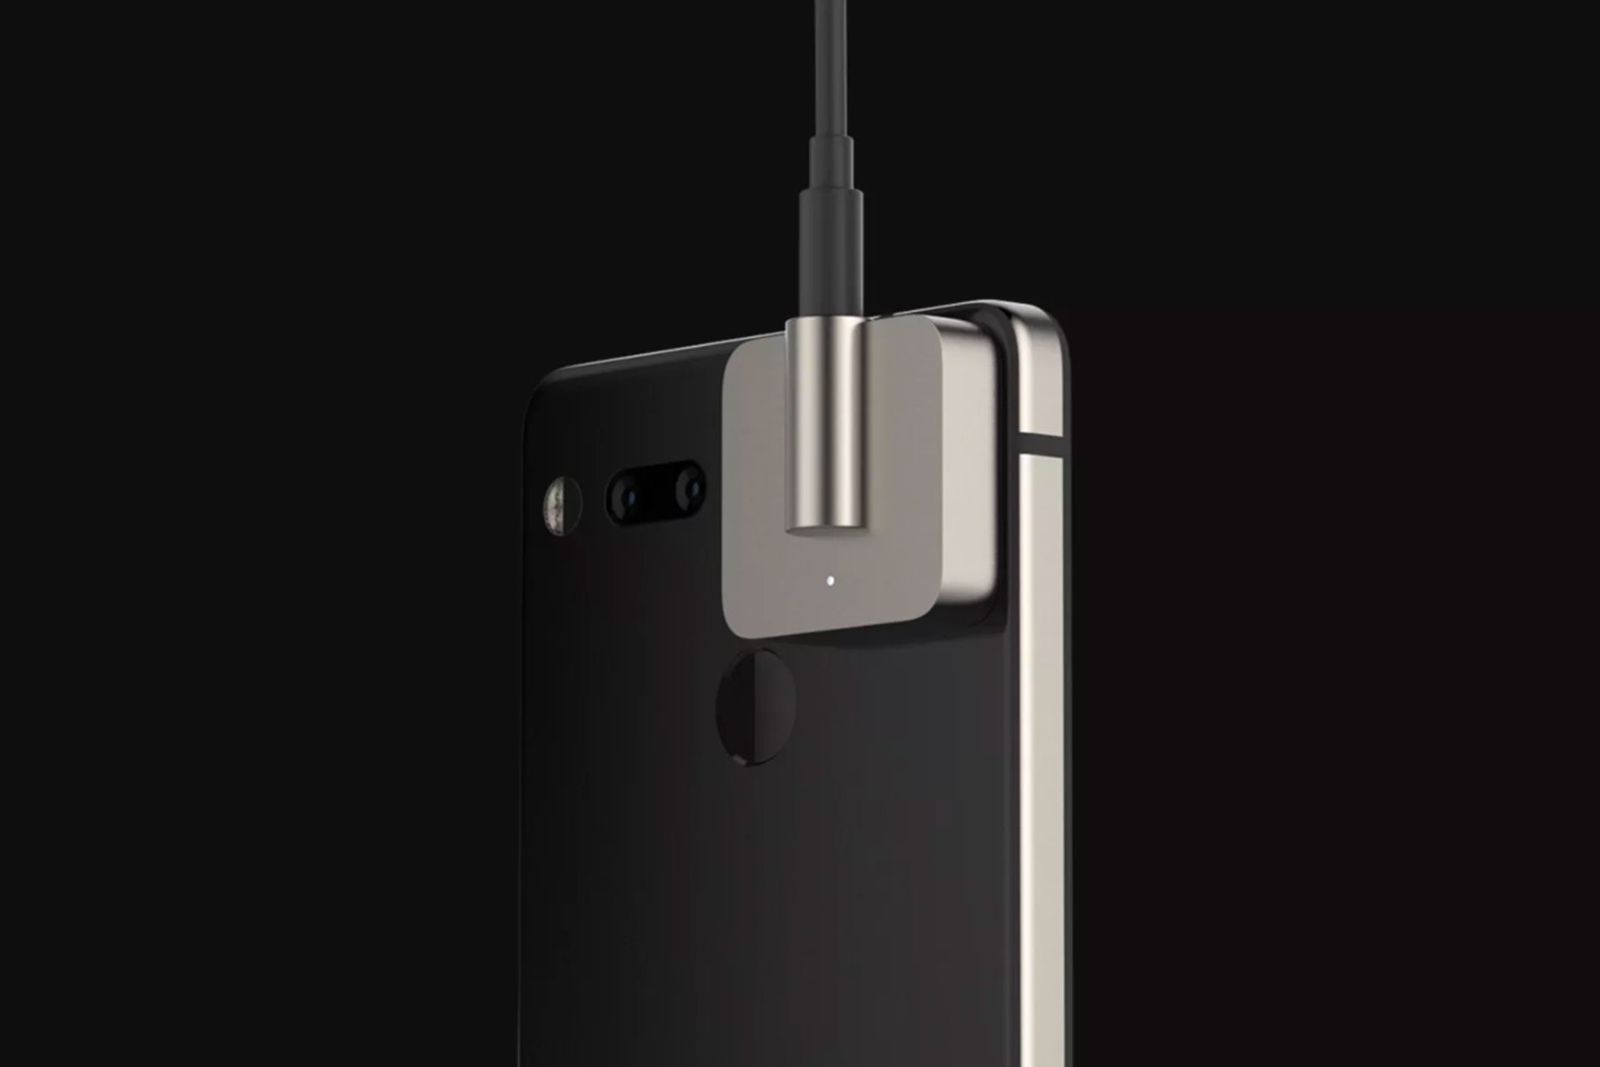 Essential gave its headphone jack adapter a whopping 149 price tag image 1